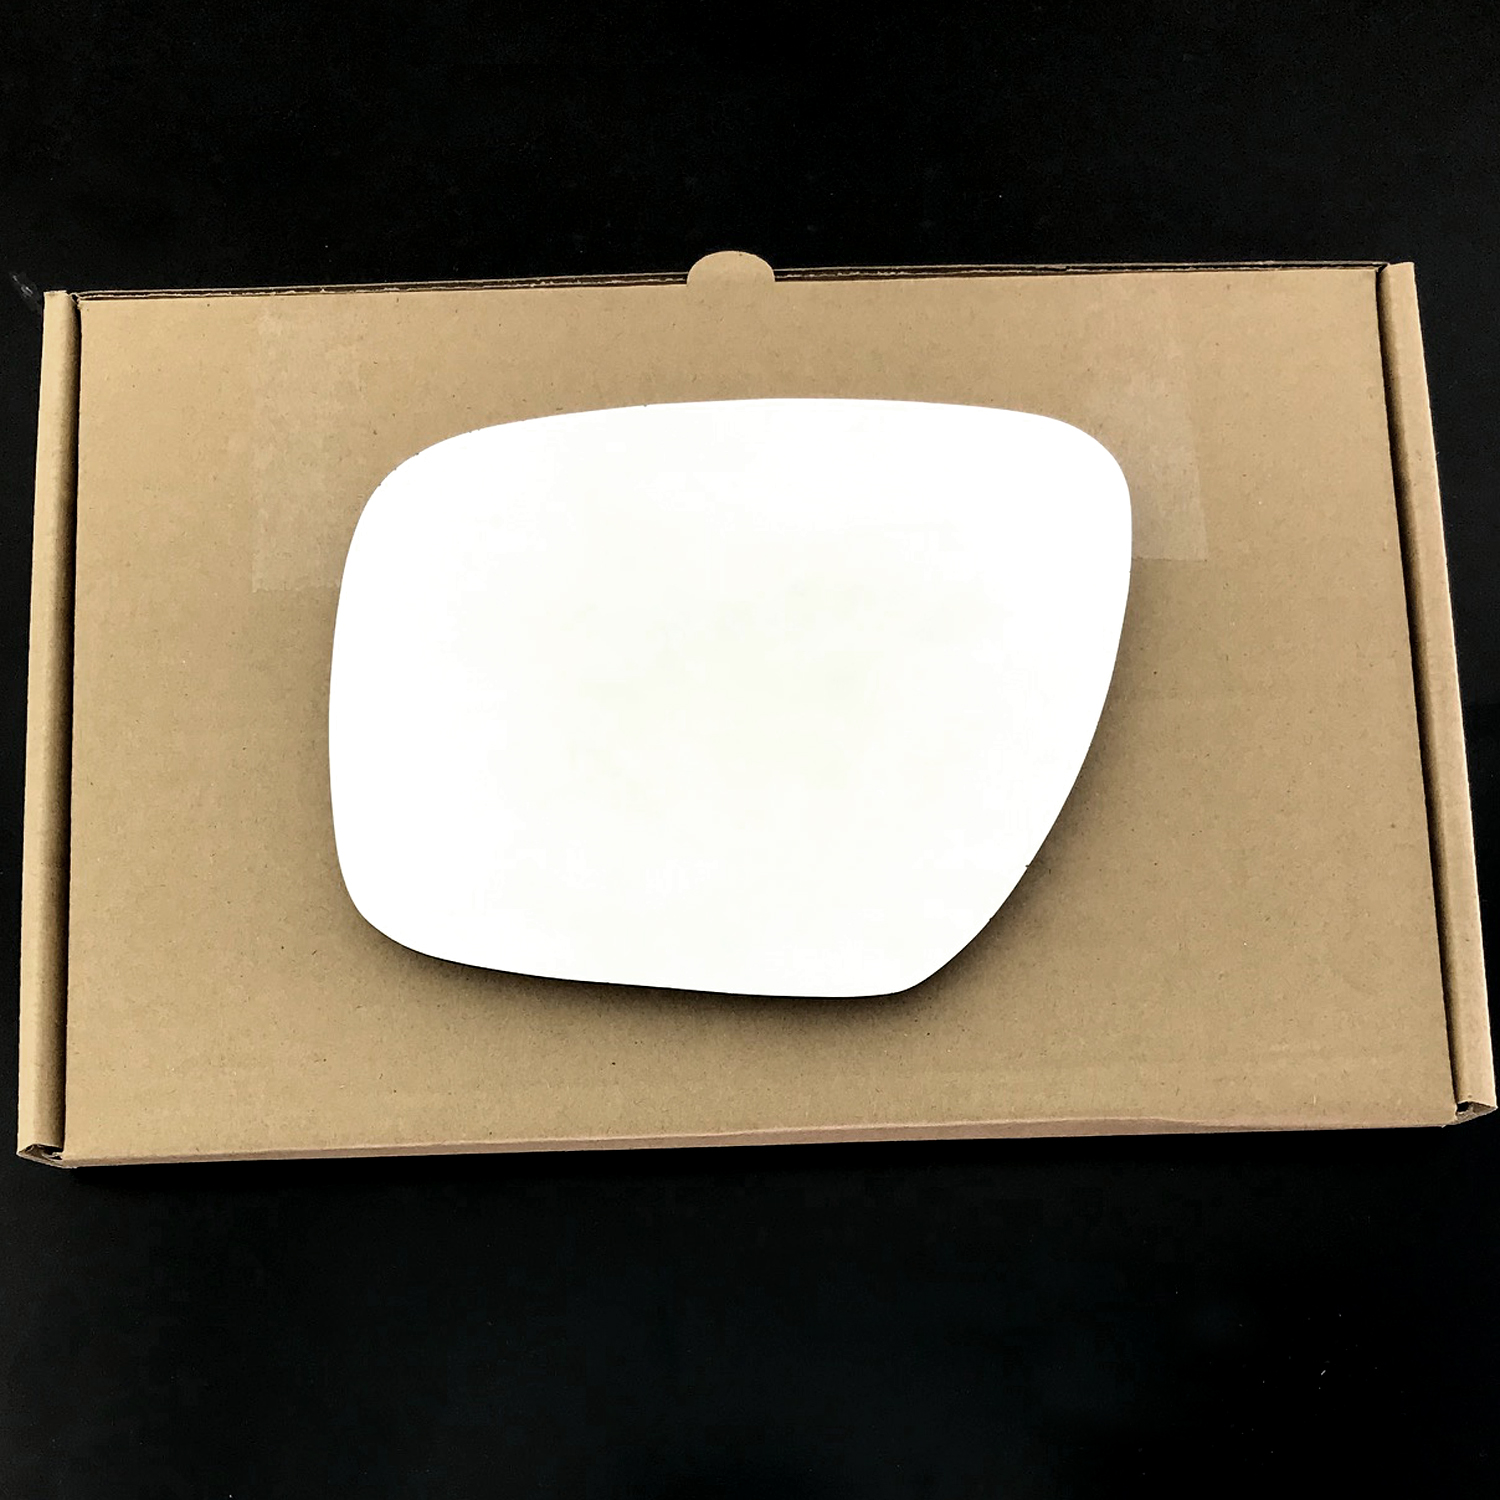 Mazda CX 7 Wing Mirror Glass LEFT HAND ( UK Passenger Side ) 2009 to 2020 – Convex Wing Mirror